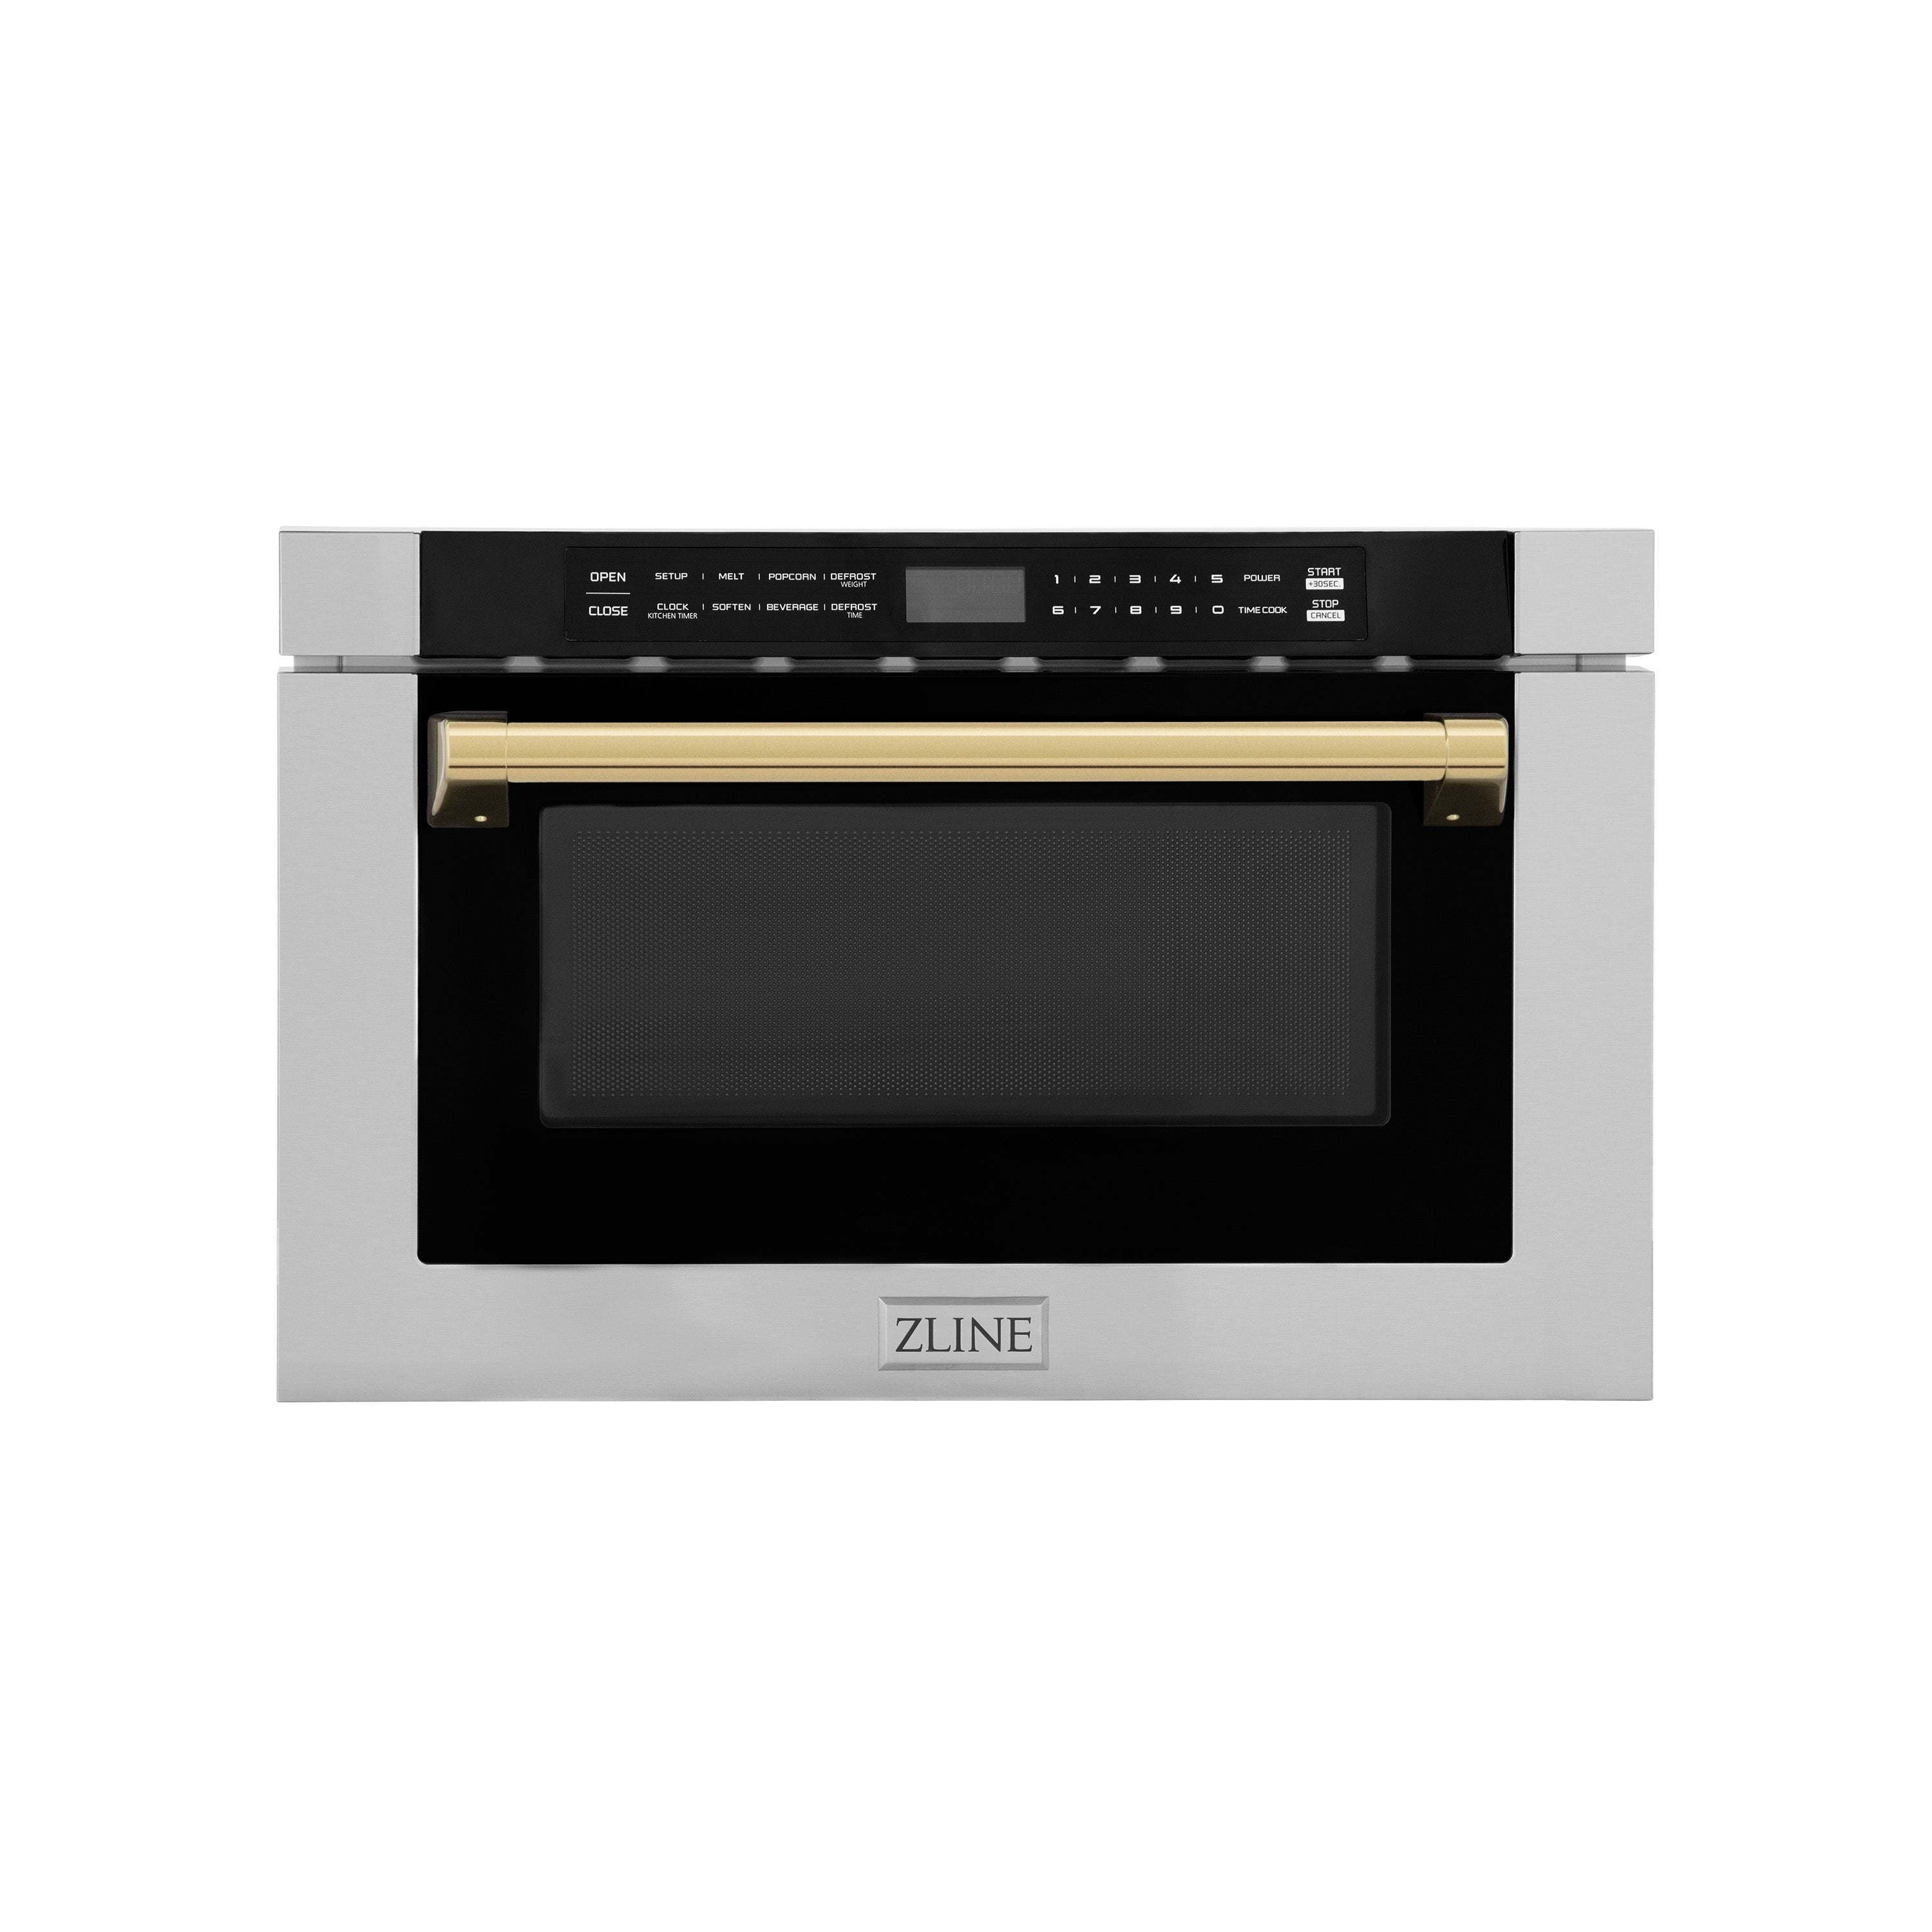 ZLINE Autograph Edition 24" 1.2 cu. ft. Built-in Microwave Drawer with a Traditional Handle in Stainless Steel and Polished Gold Accents